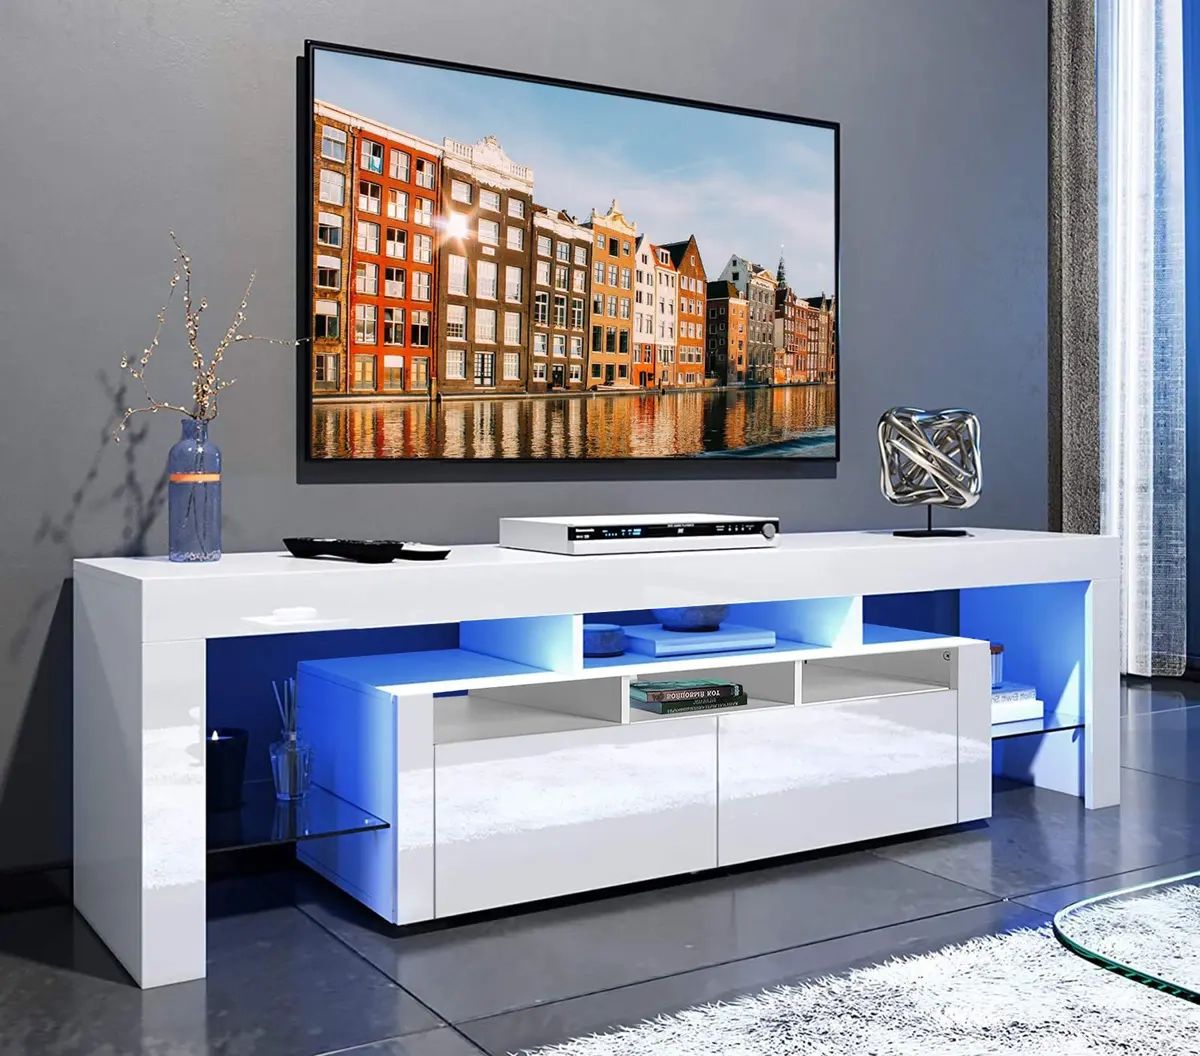 Modern Tv Unit Cabinet White Led Tv Stand High Gloss Doors Living Room Rgb  Light | Ebay With White Tv Stands Entertainment Center (View 5 of 15)